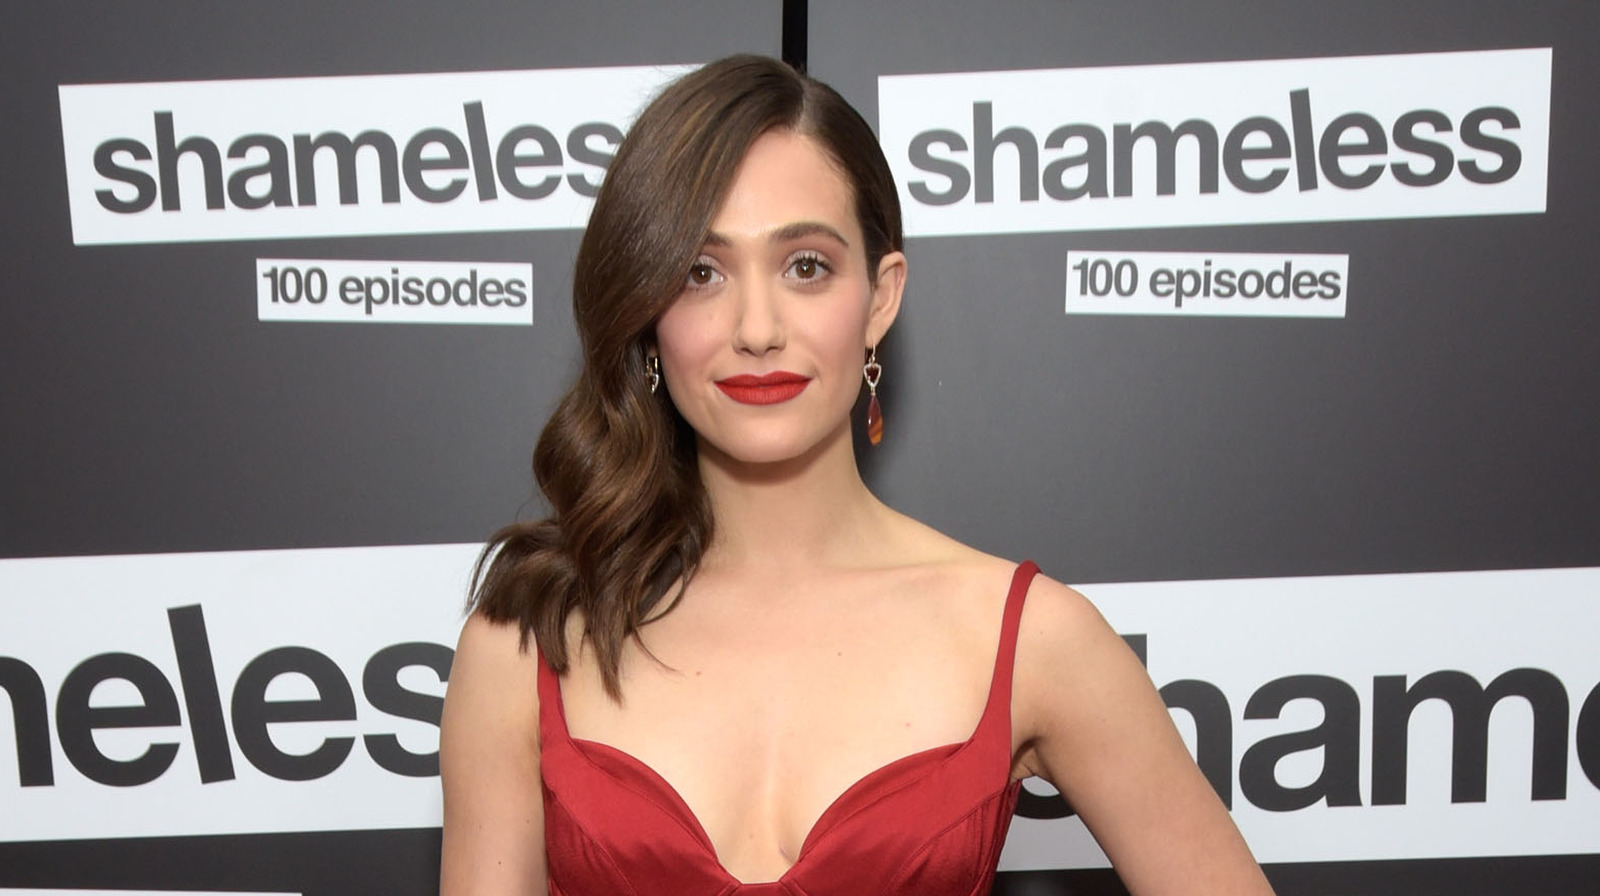 Celeb Why Emmy Rossum almost didn't audition for Shameless